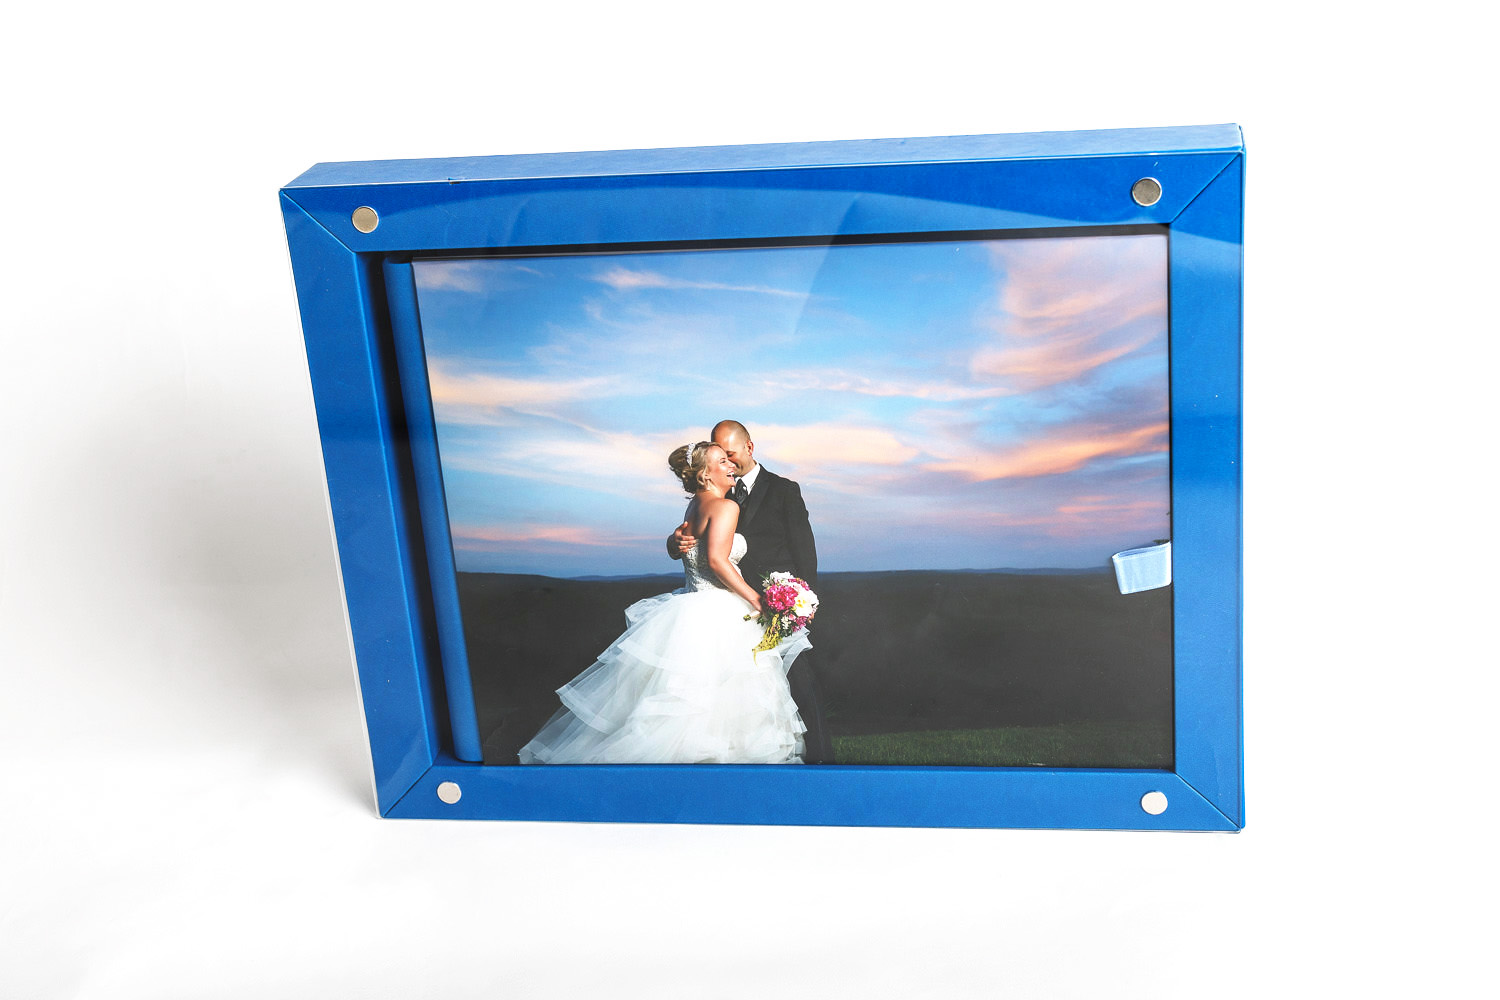 A framed wedding photo of a smiling couple embracing outdoors at sunset, displayed in a blue frame against a white backdrop, perfect for wedding album designs.